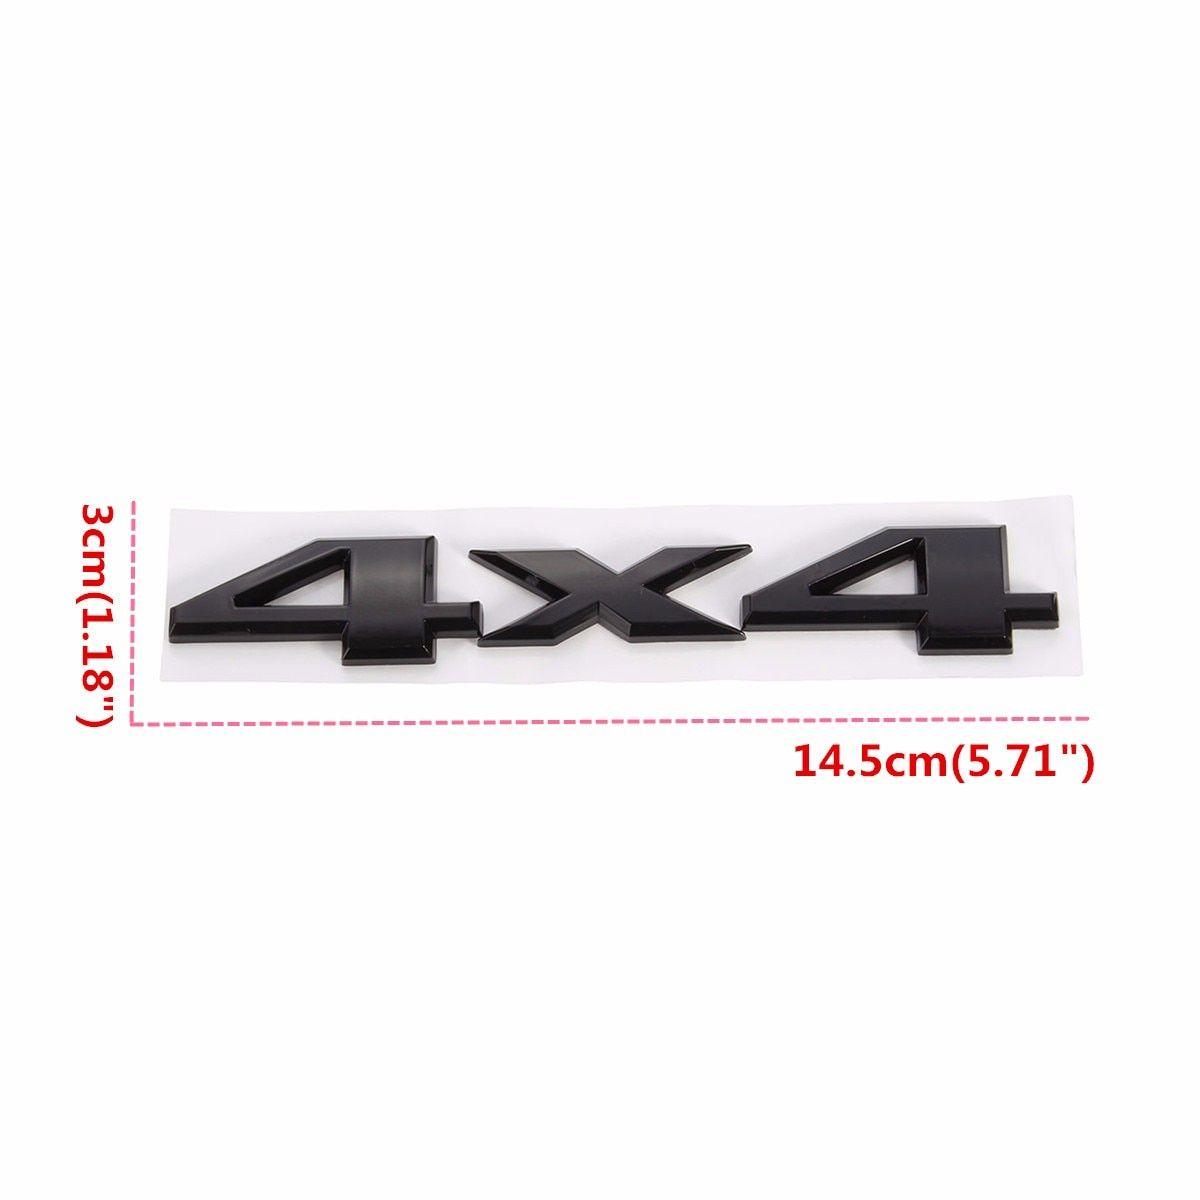 4x4 Logo - US $1.99. 3D 4x4 Emblem Badge Car Sticker Logo Decal For Jeep /Grand /Cherokee Black Silver In Car Stickers From Automobiles & Motorcycles